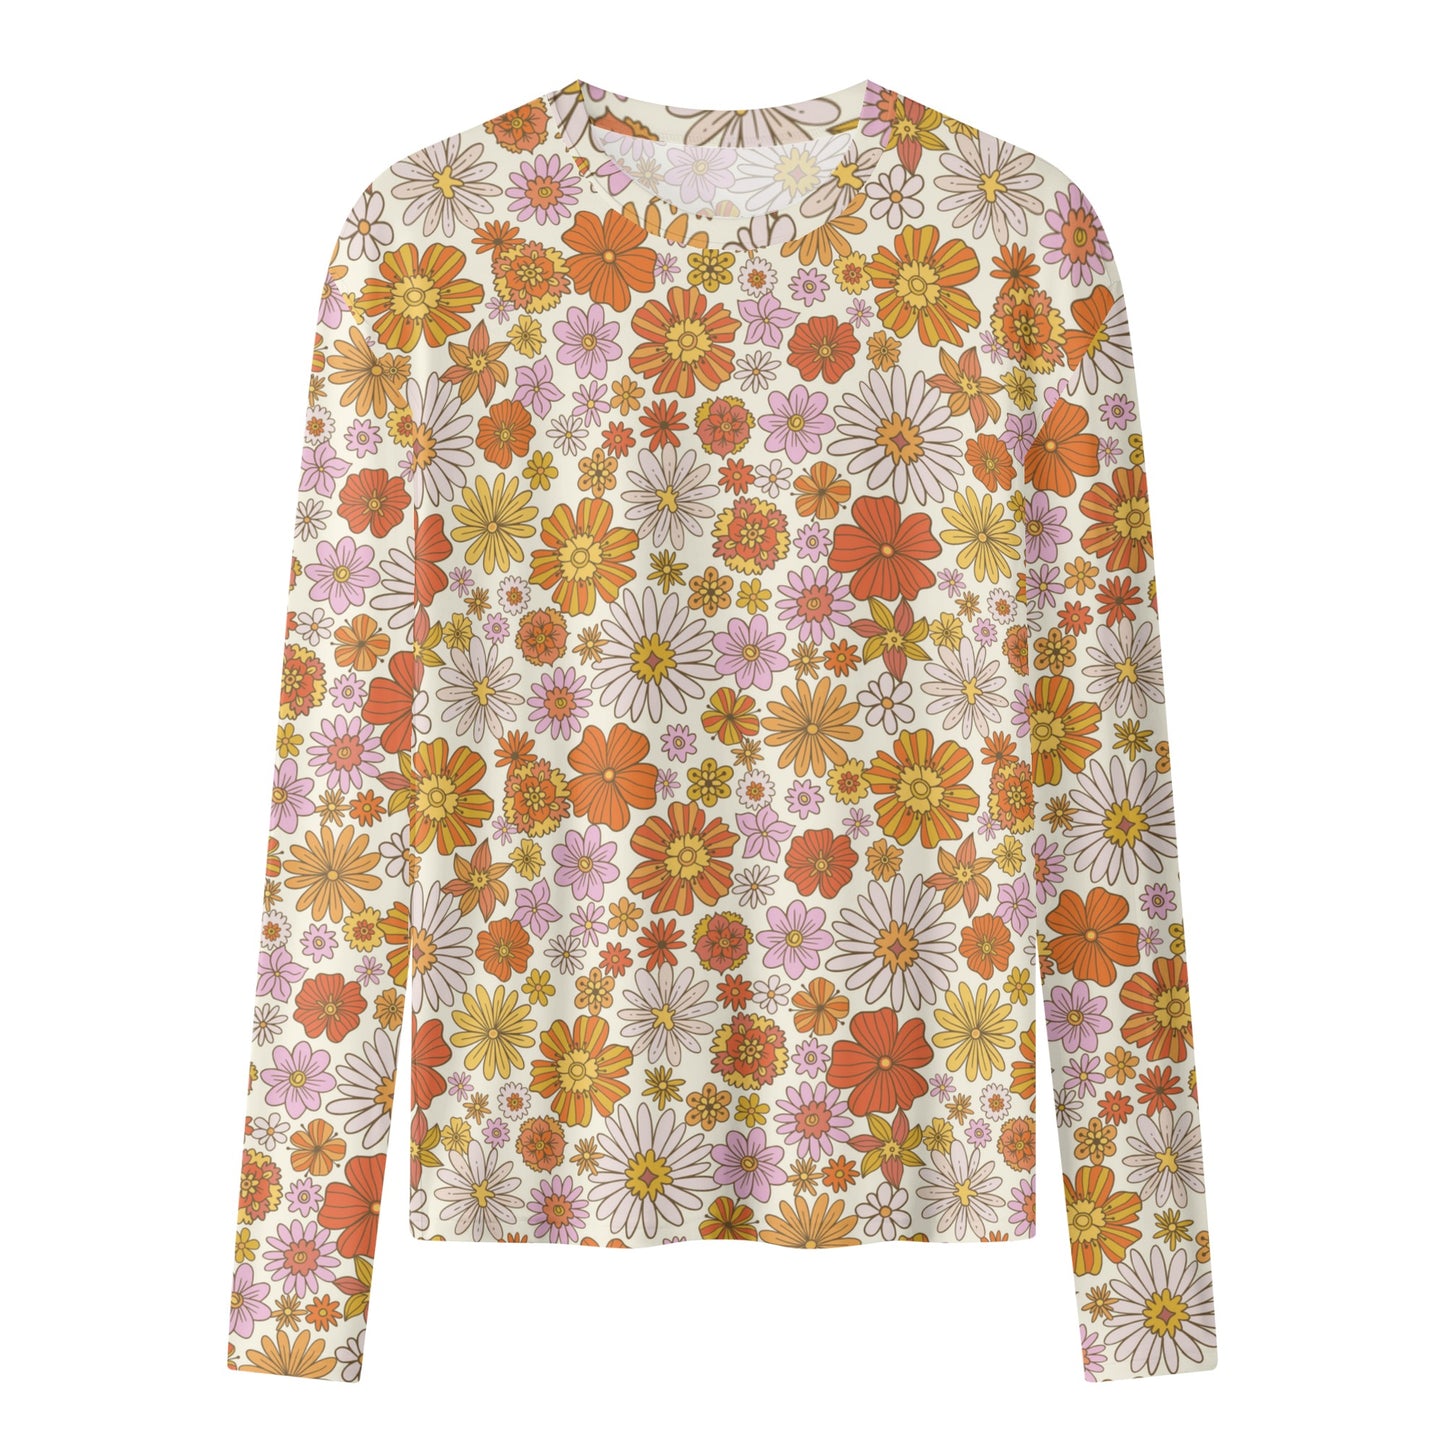 Groovy Flowers Women's Long Sleeve T Shirt, Retro Vintage Floral 70s Funky Designer Graphic Aesthetic Crew Neck Tee Starcove Fashion